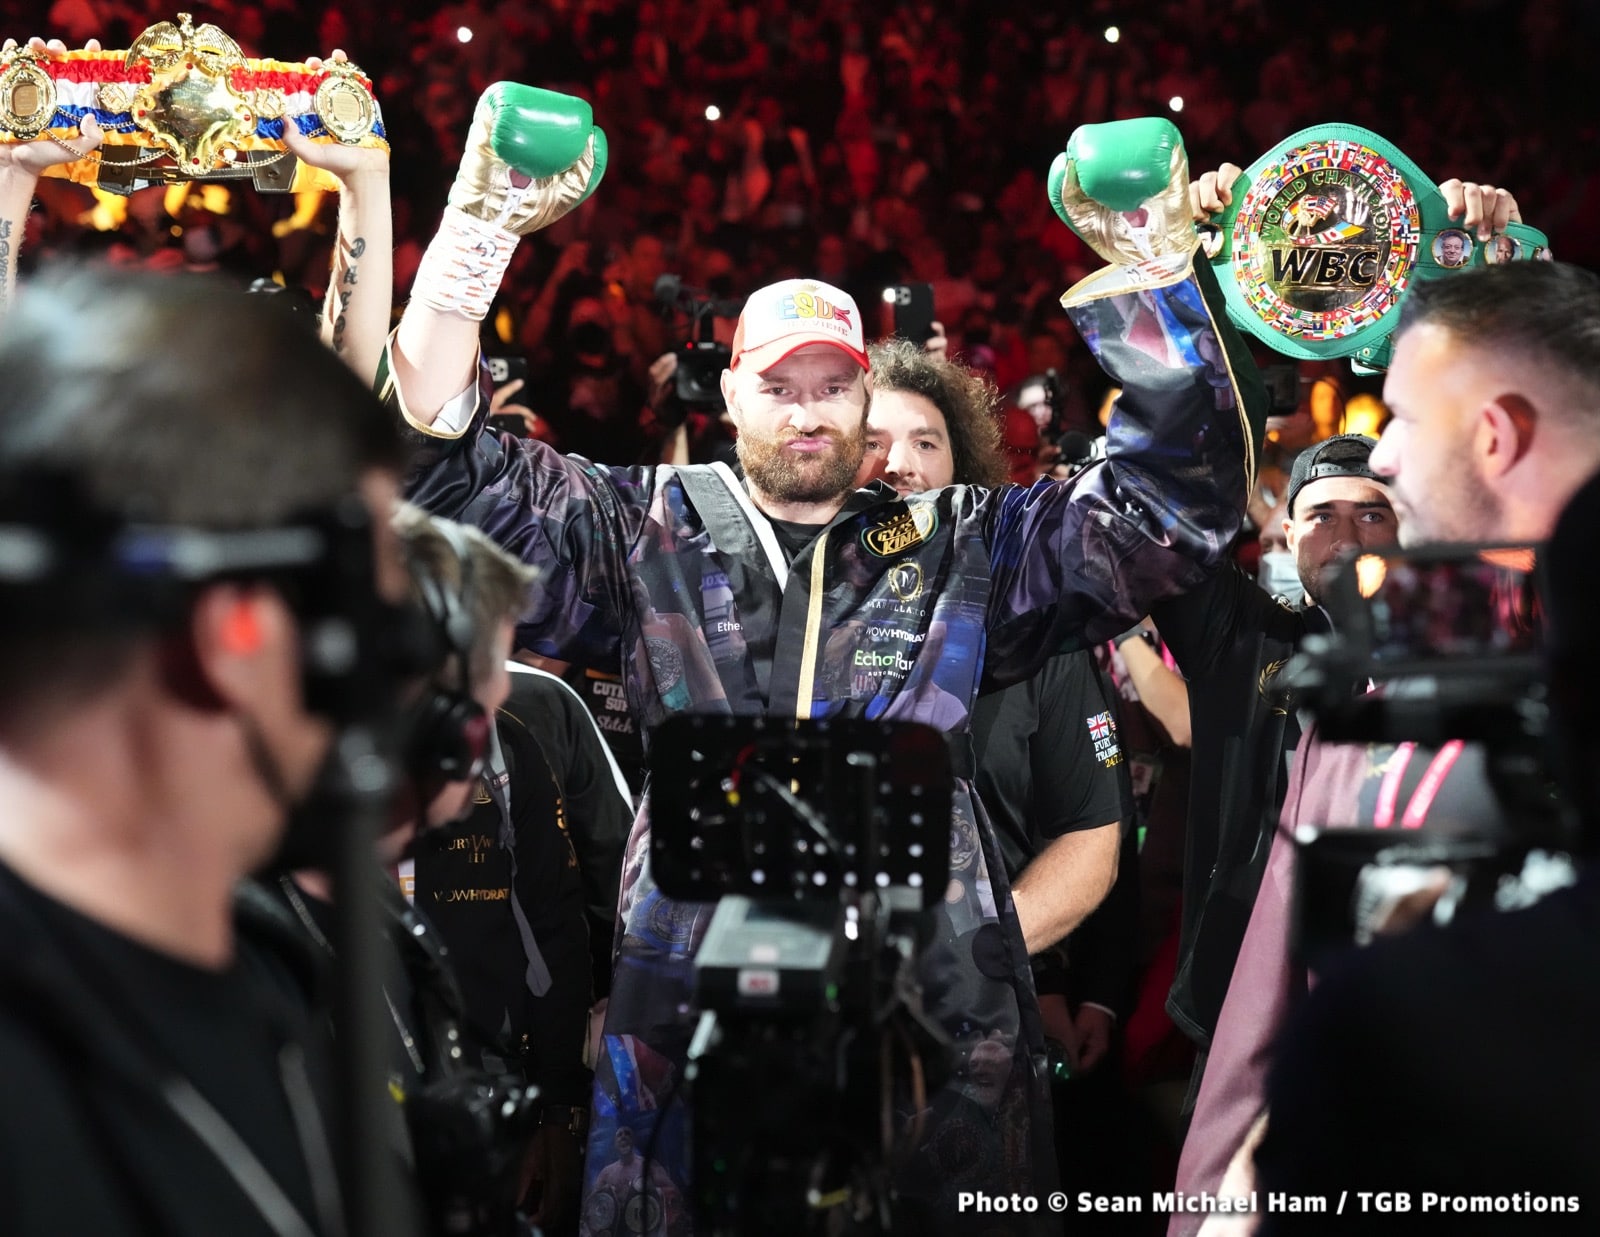 Impossible for Fury to become Franchise WBC champion says Eddie Hearn